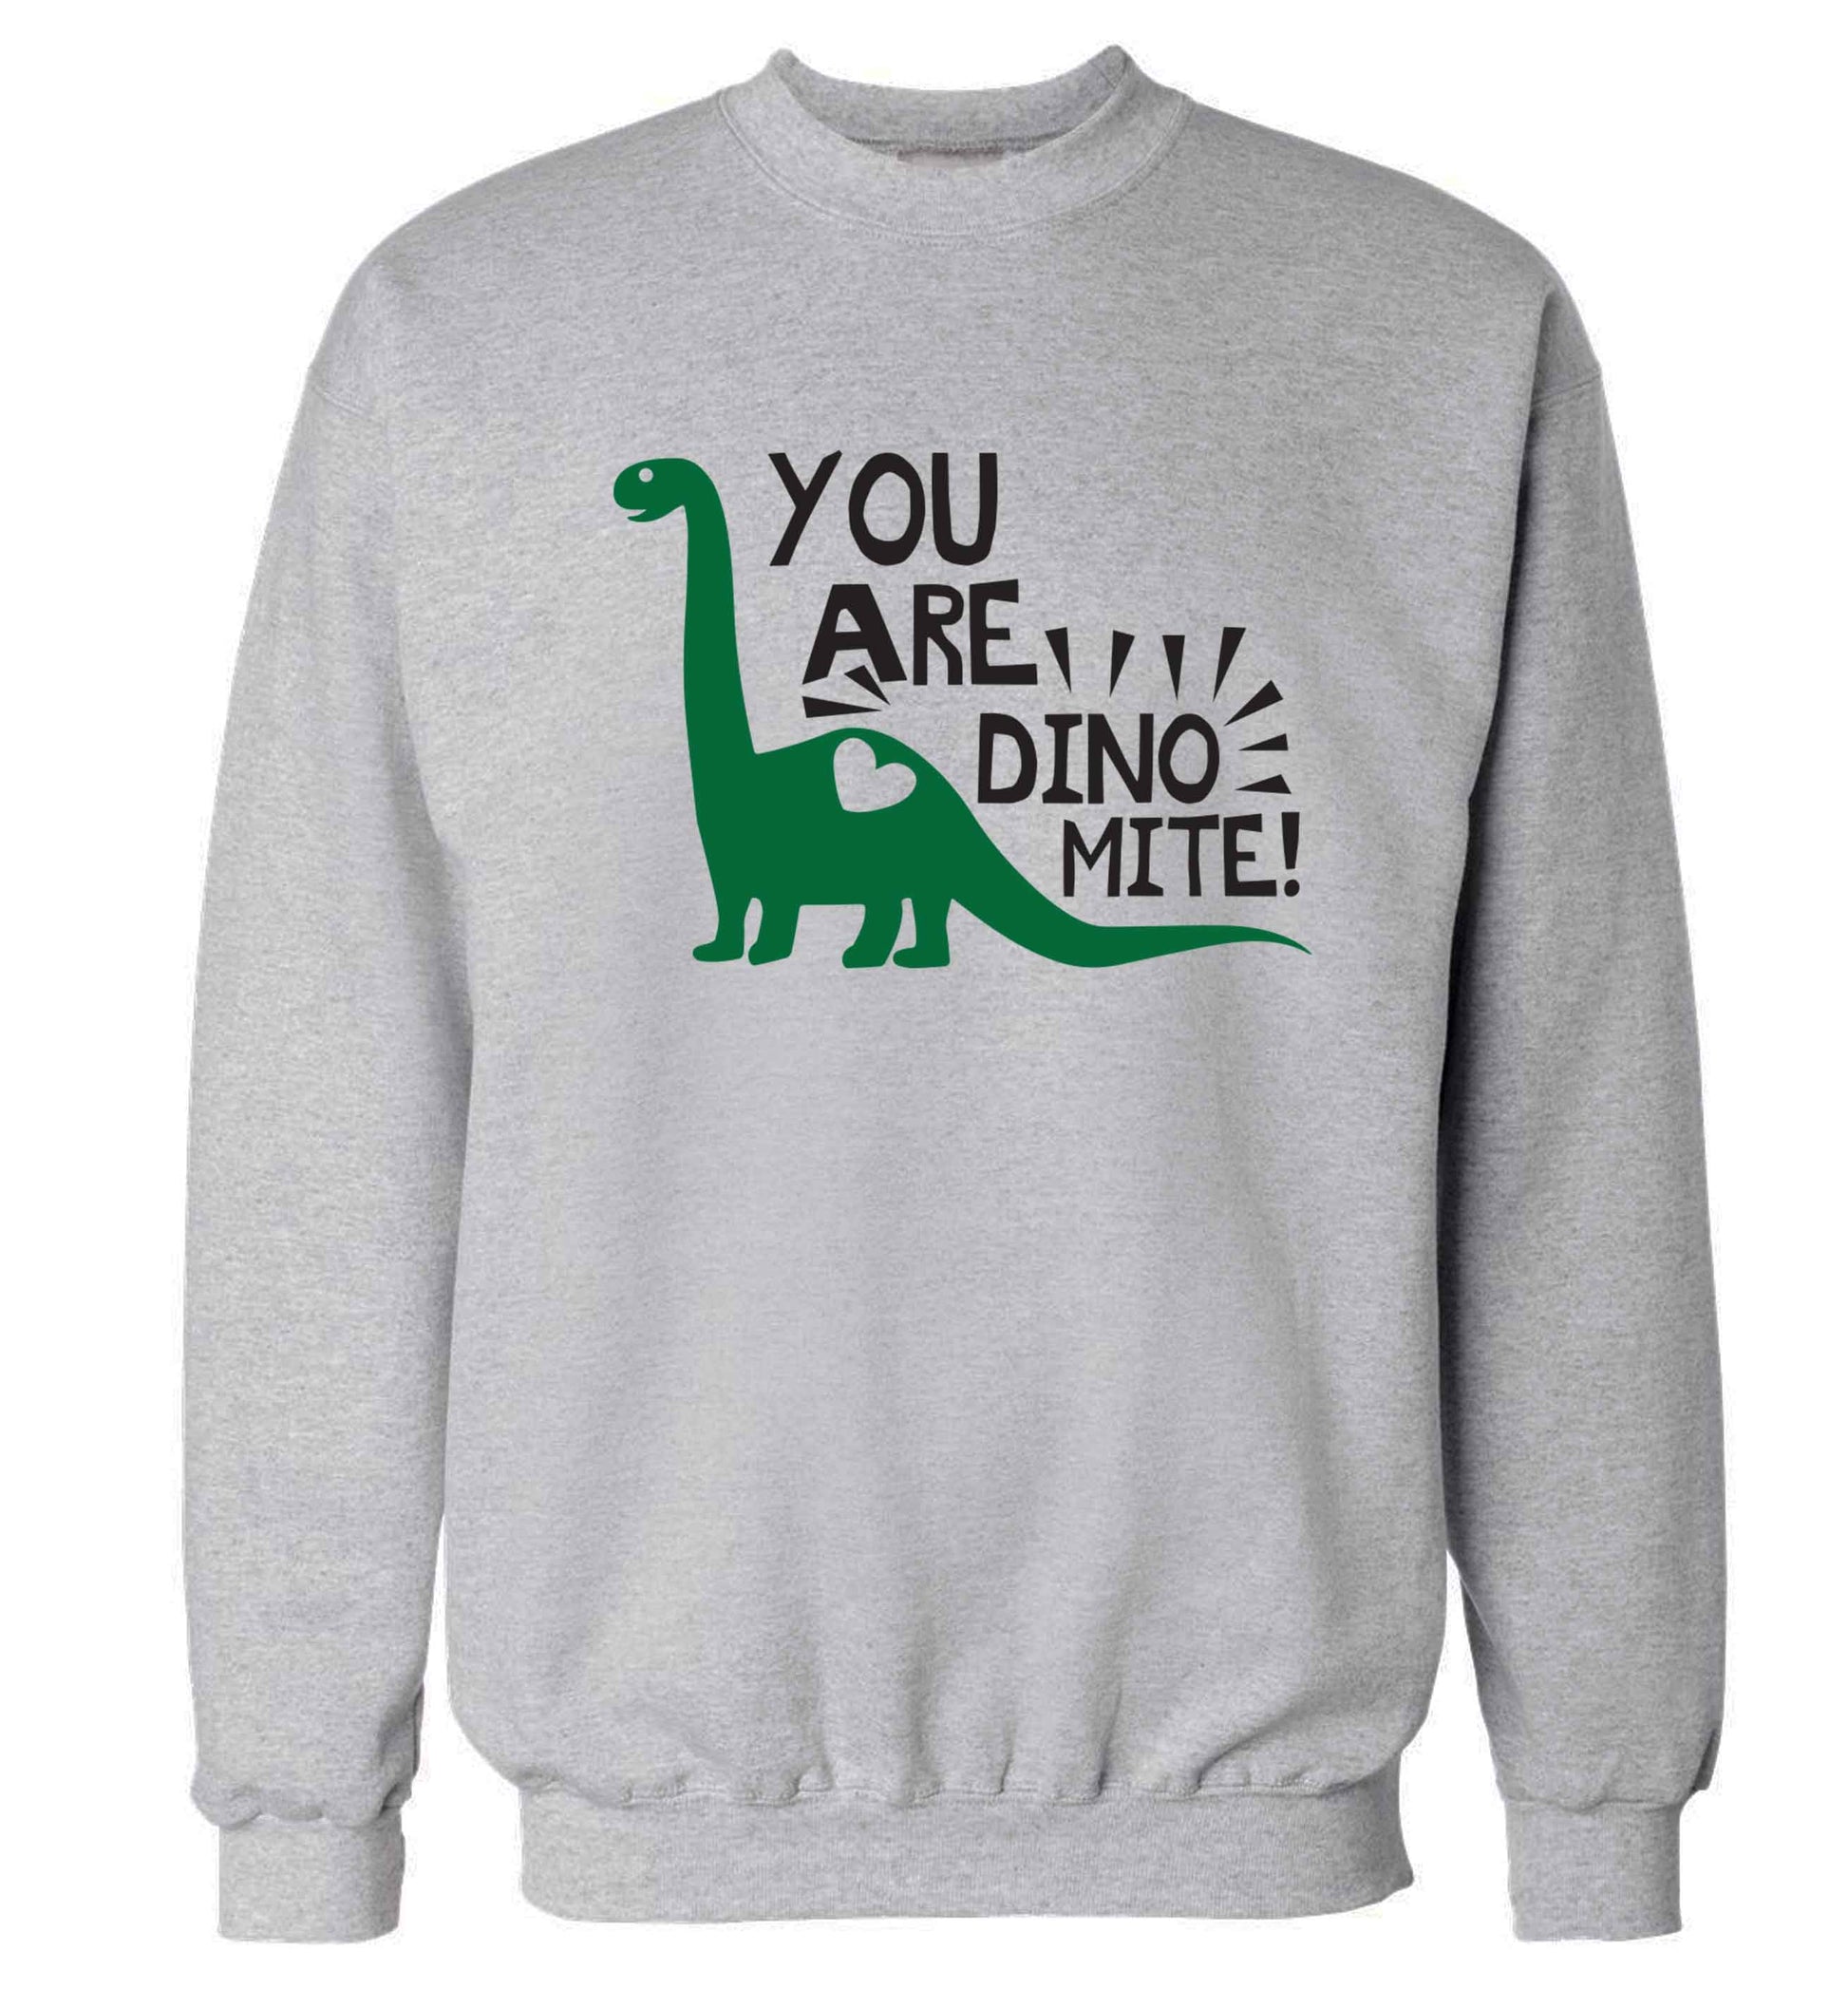 You are dinomite! Adult's unisex grey Sweater 2XL